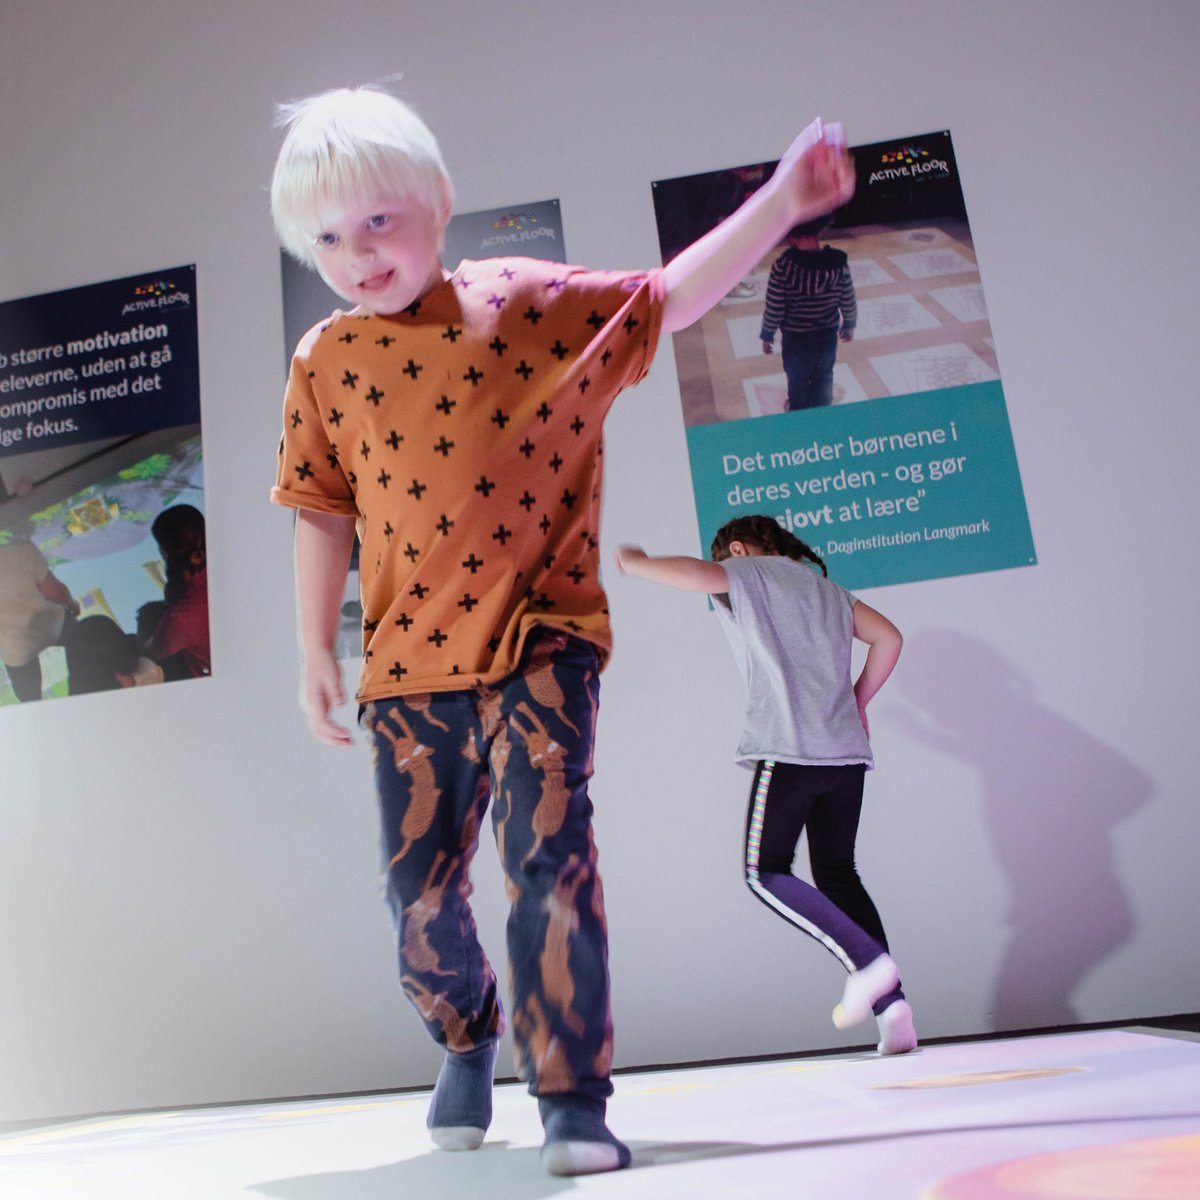 EMBODIED LEARNING (EL) is a perspective to consider in shaping The Future Of Education 🚀 Integrating both mind and body in the learning process can achieve many benefits. Read more about ActiveFloor & EL: buff.ly/46VQO6l #EmbodiedLearning #Edtech #ActiveFloor